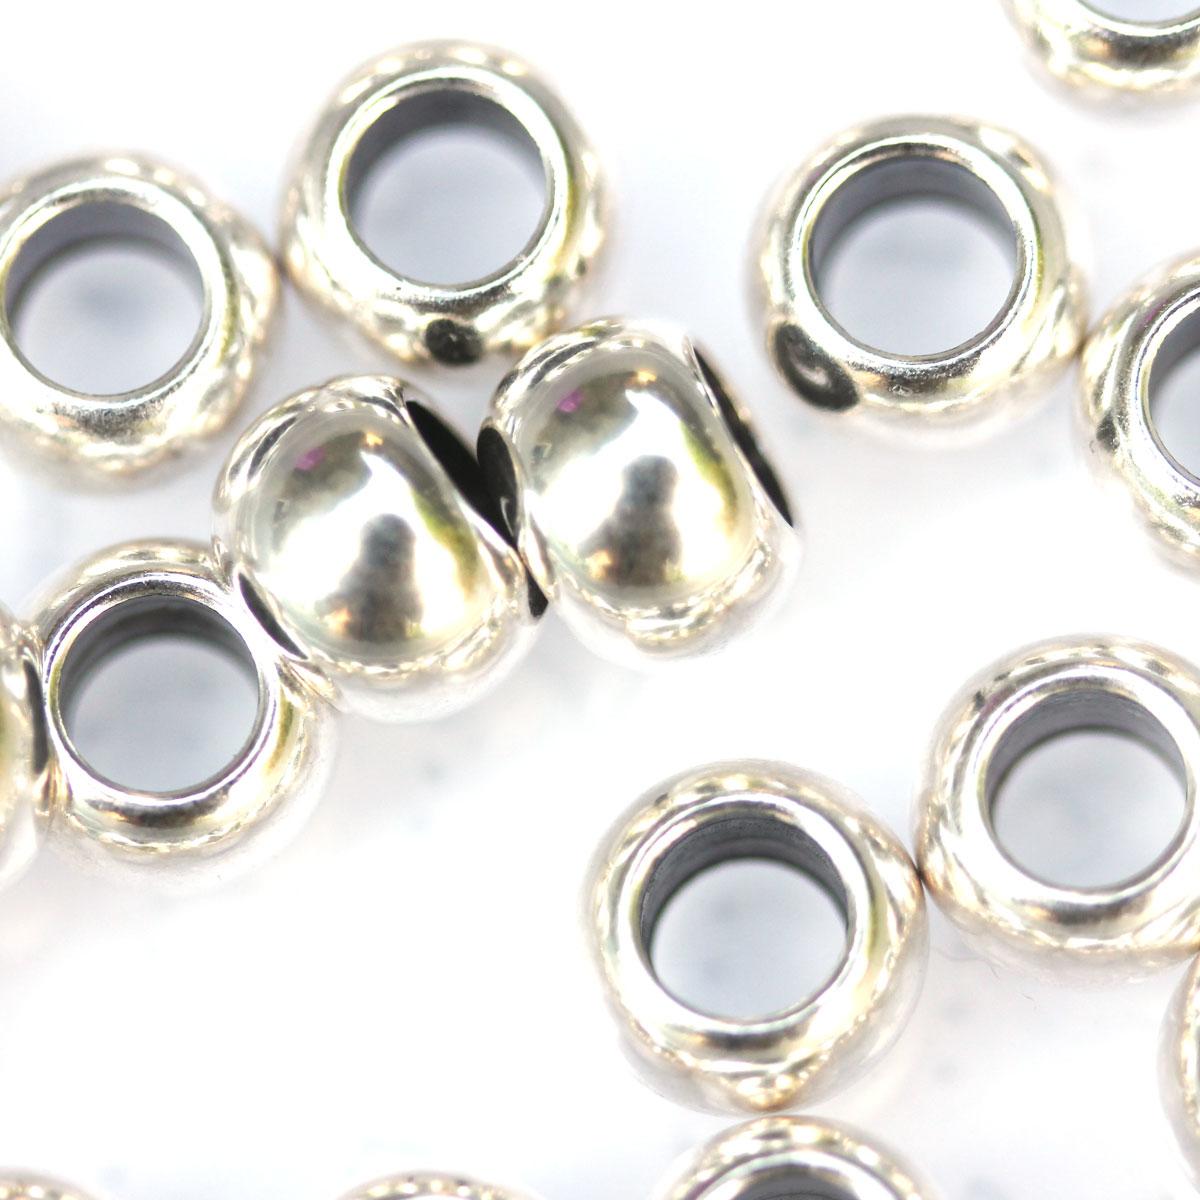 Silver Large Holed Ball Bead